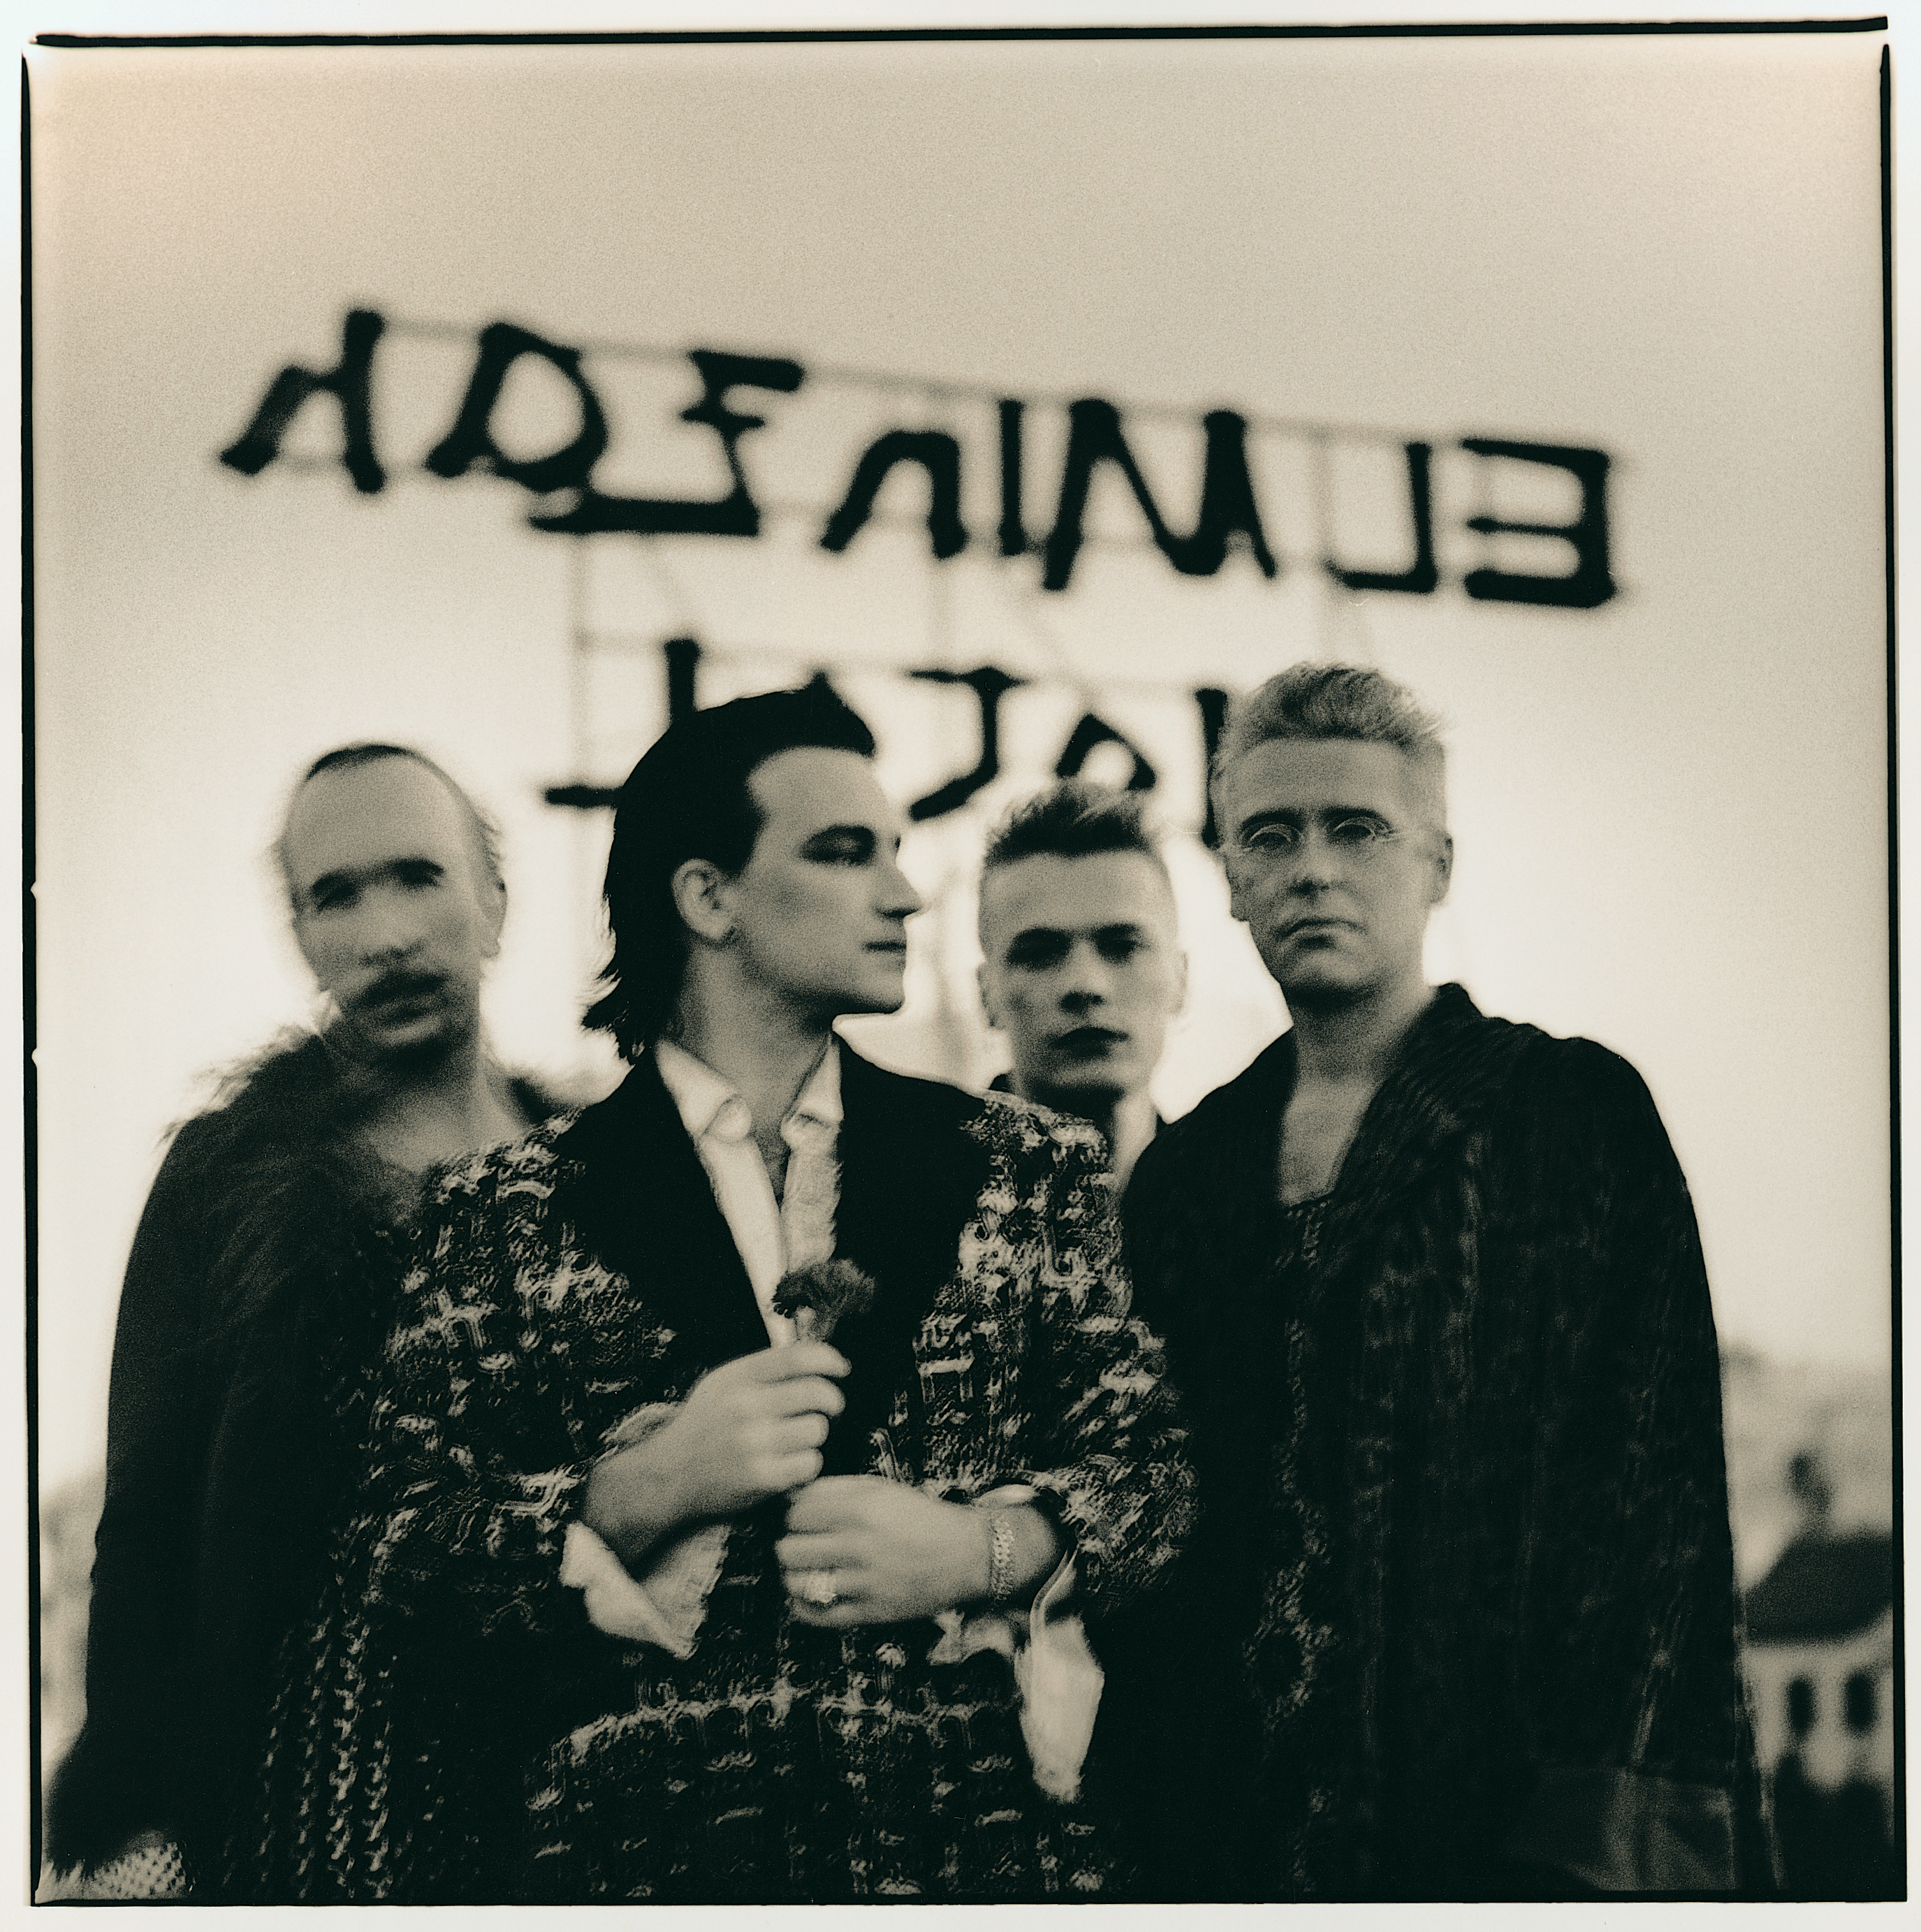 U2 Announces The Upcoming Release of ACHTUNG BABY 30TH ANNIVERSARY EDITION